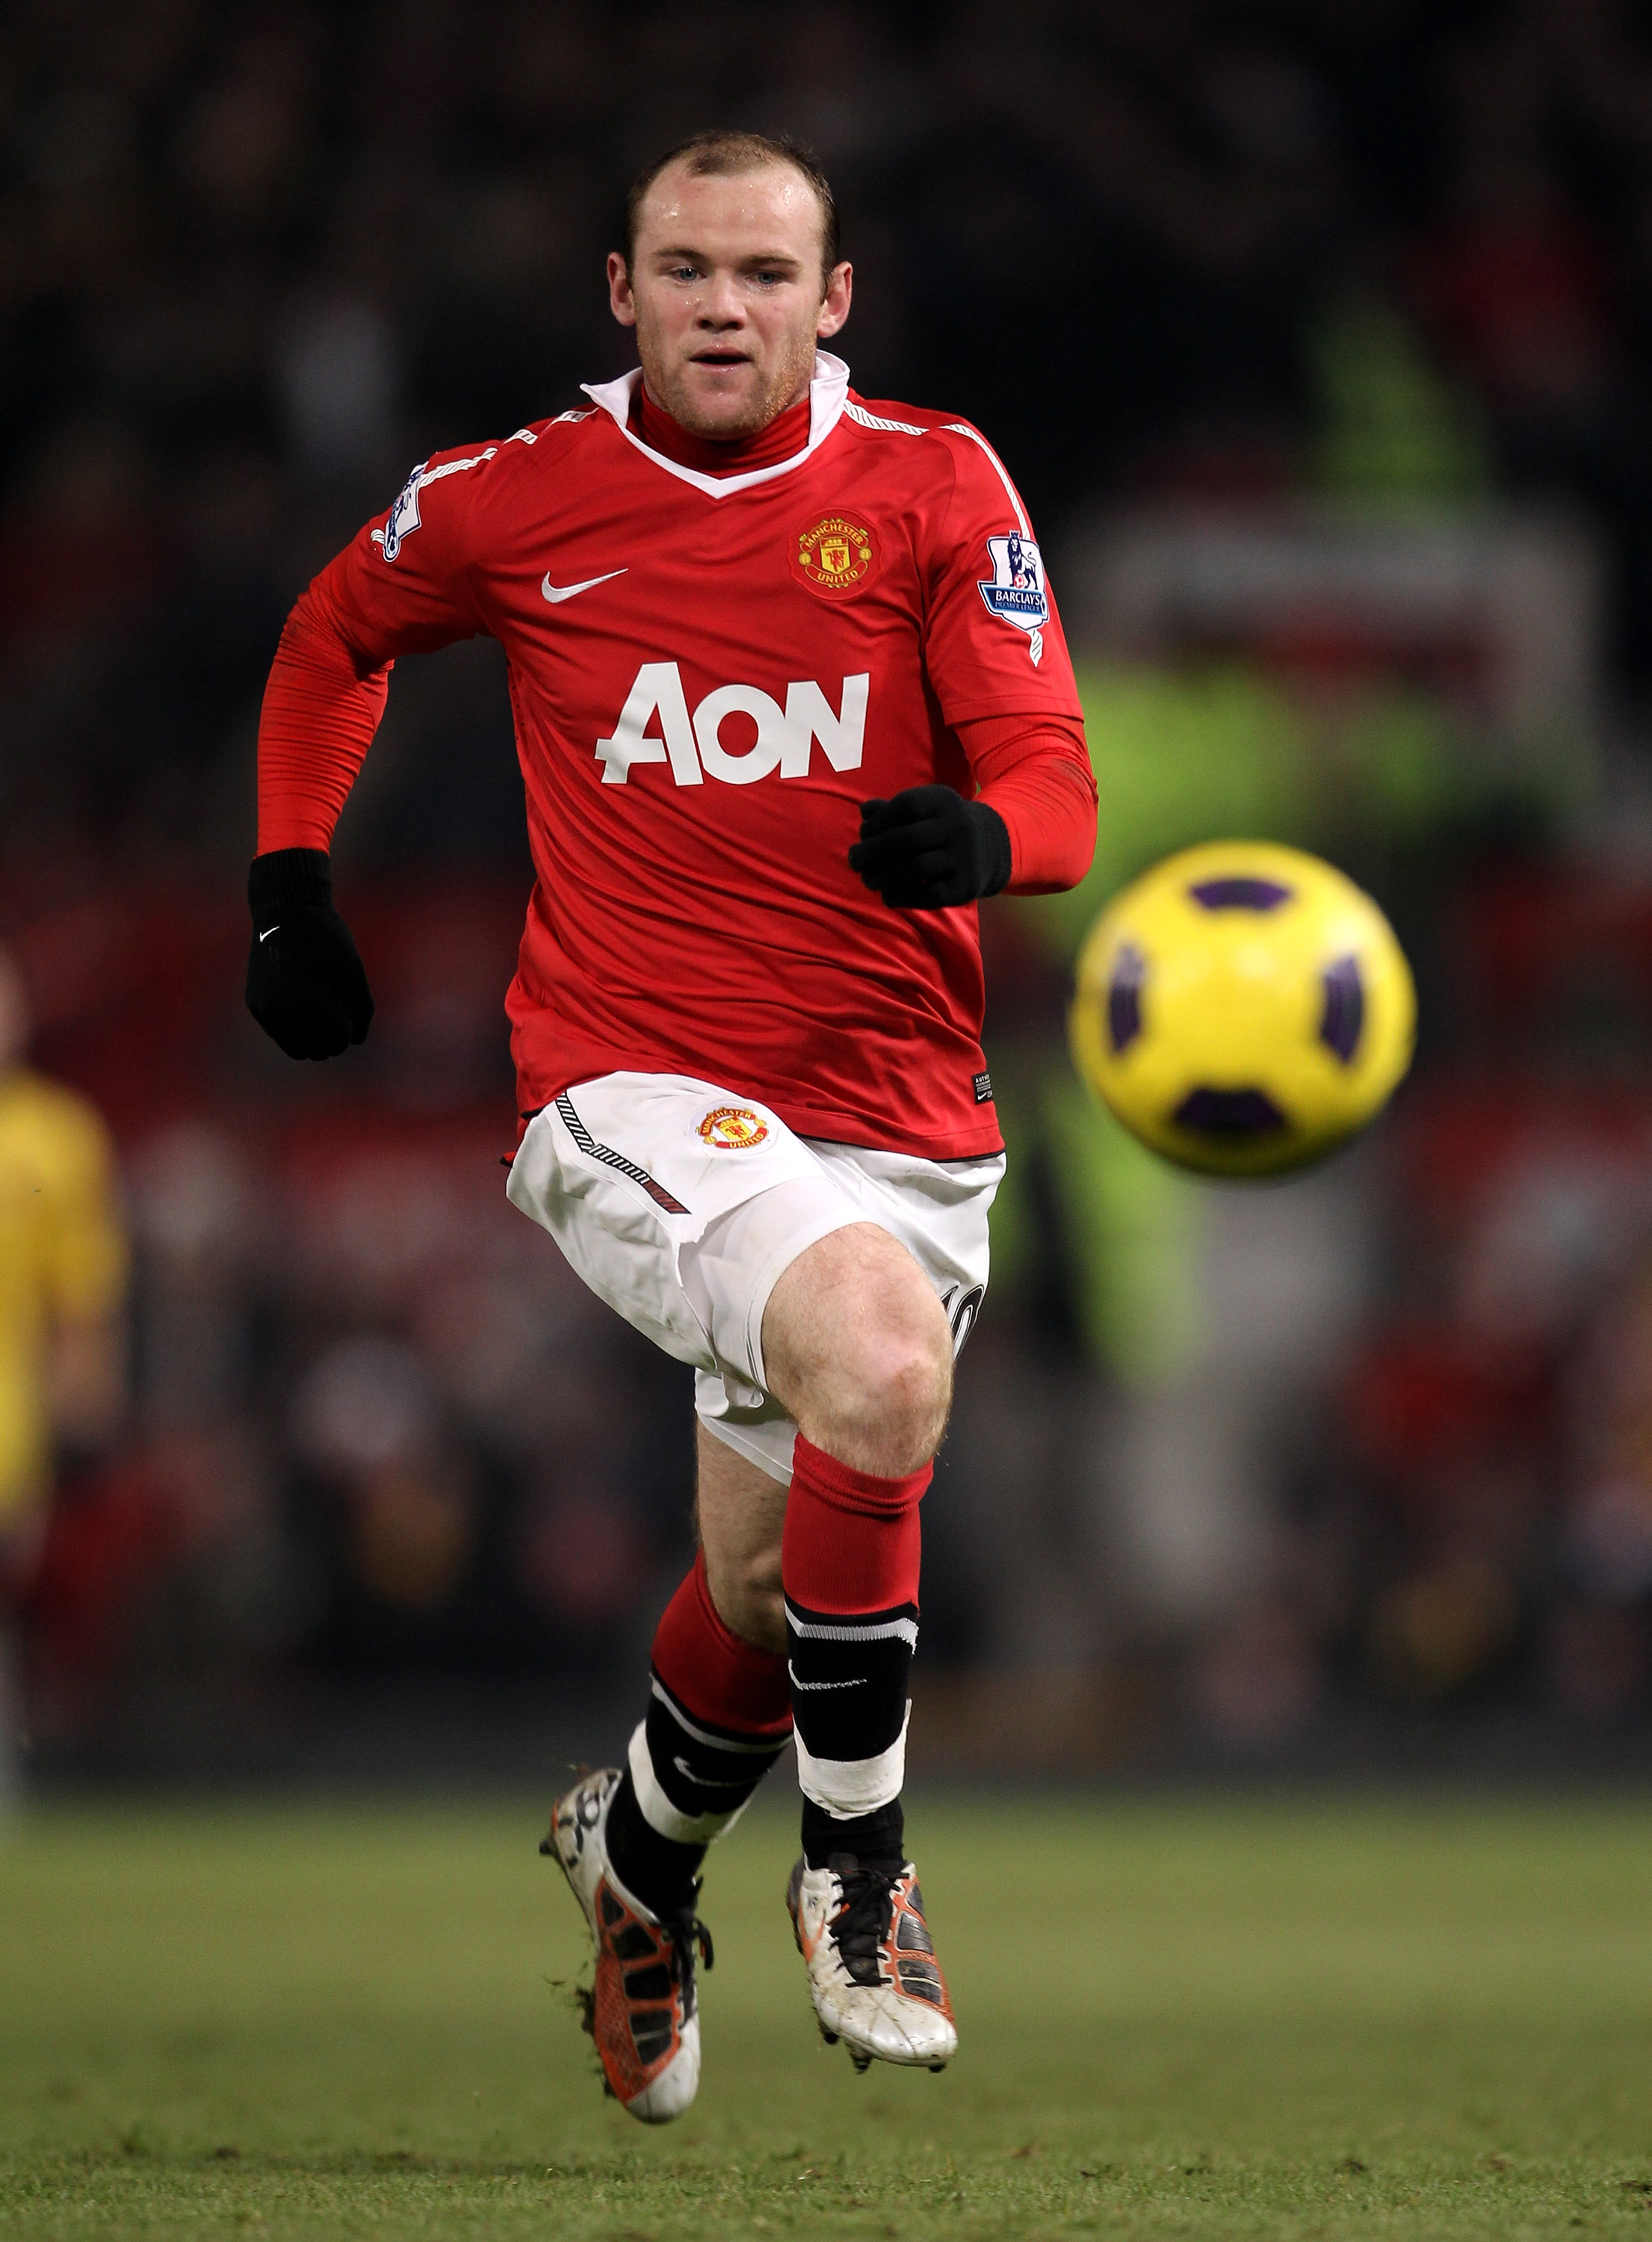 MANCHESTER, ENGLAND - DECEMBER 13:  Wayne Rooney of Manchester United in action during the Barclays Premier League match between Manchester United and Arsenal at Old Trafford on December 13, 2010 in Manchester, England.  (Photo by Alex Livesey/Getty Image